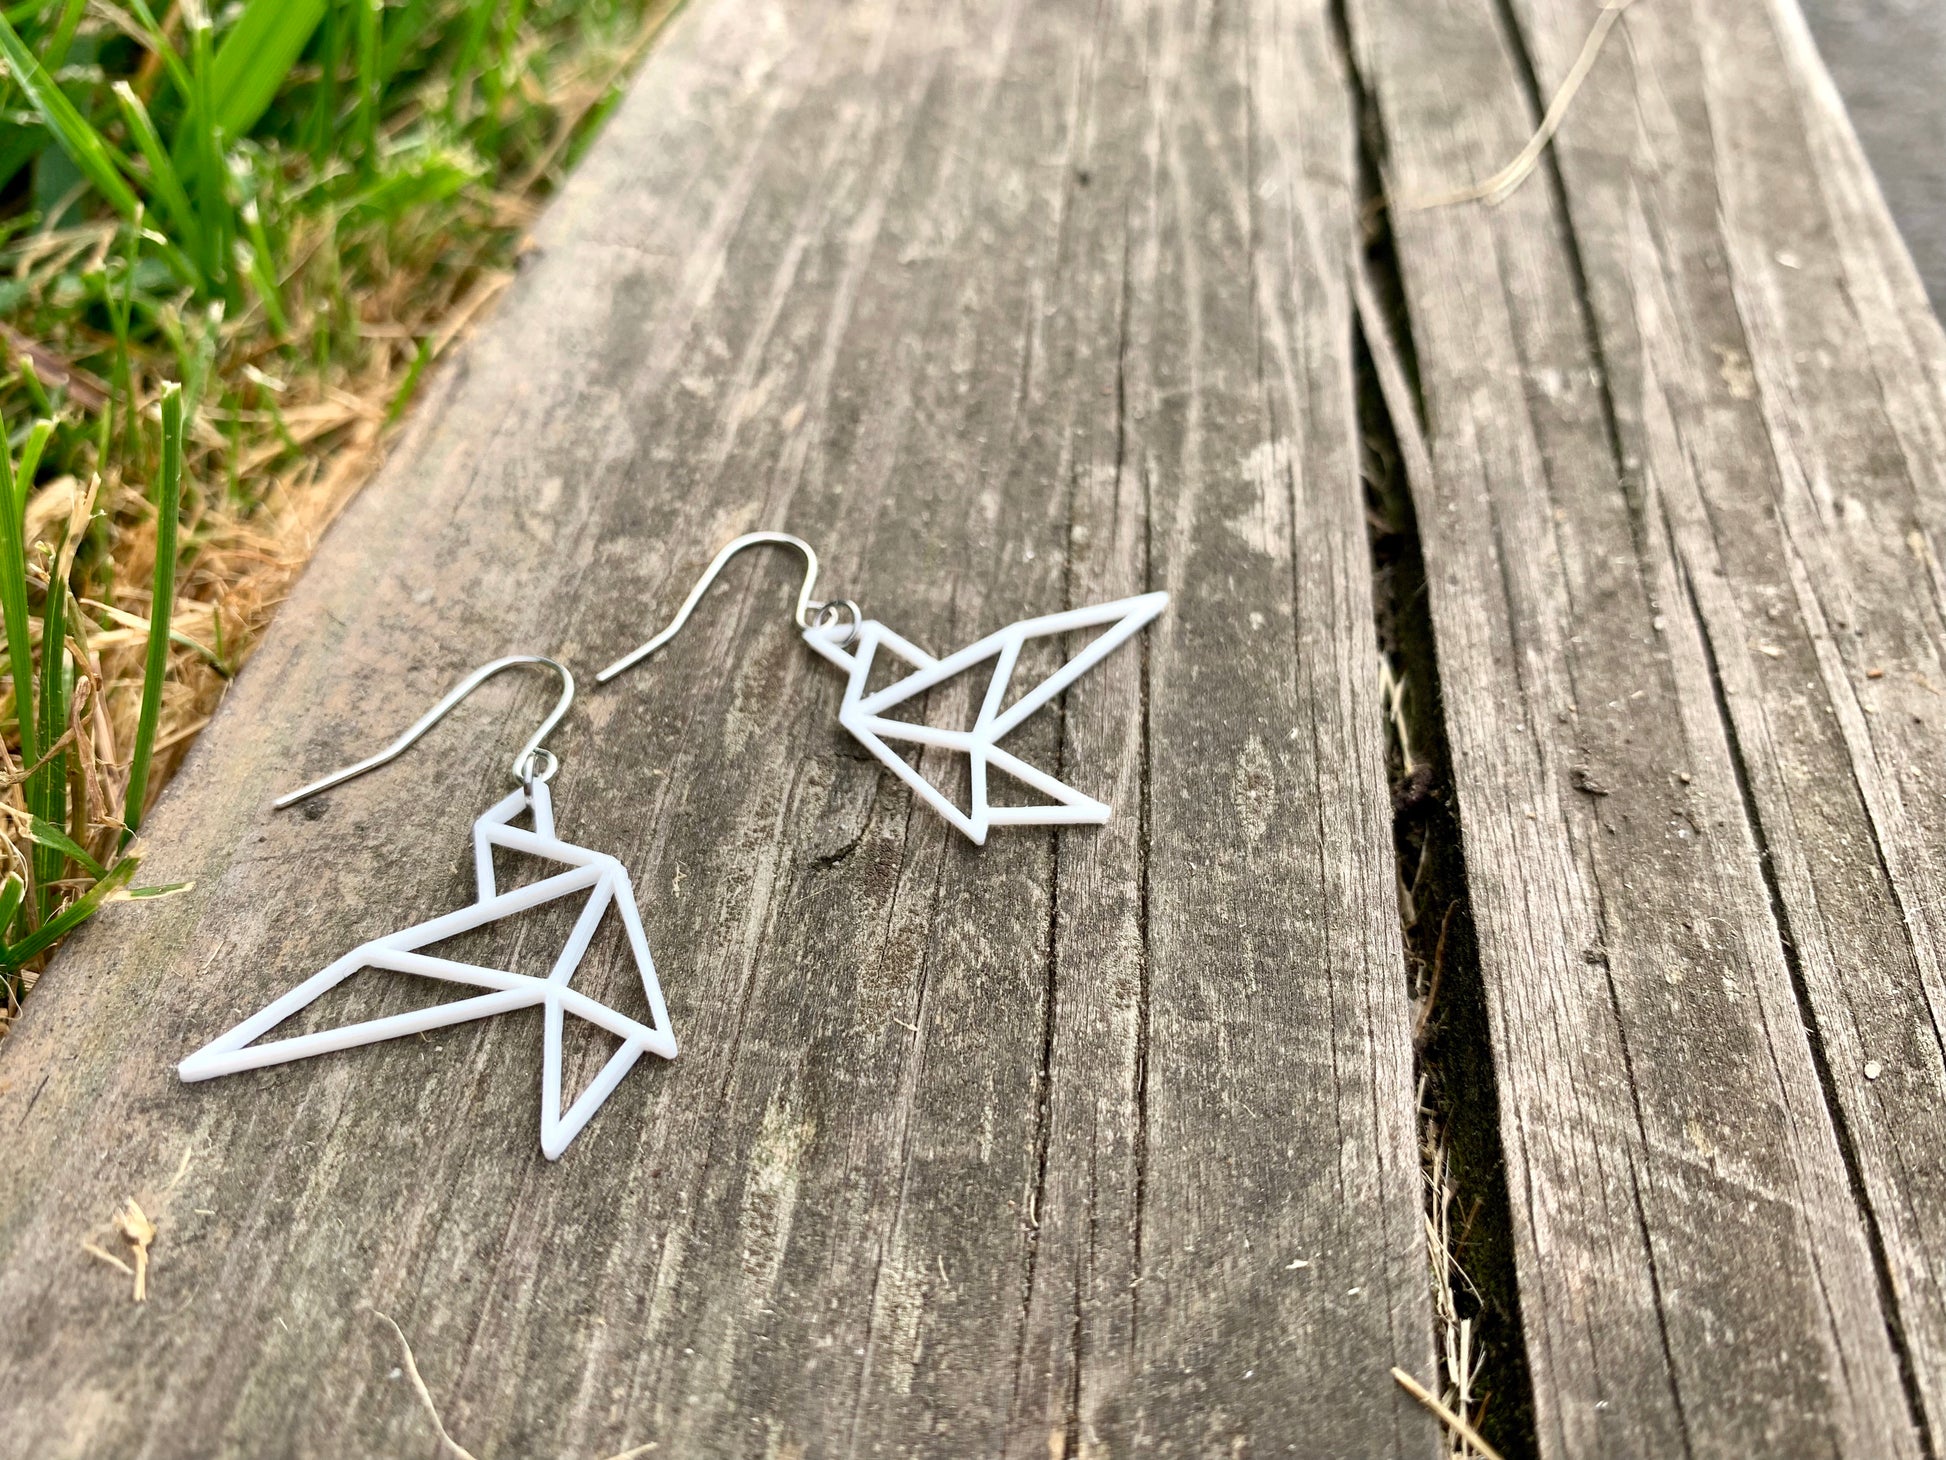 Laying on a old weathered piece of wood are two R+D earrings. They are shaped as geometric birds in flight. They are printed in a sustainable white filament that is plant based.